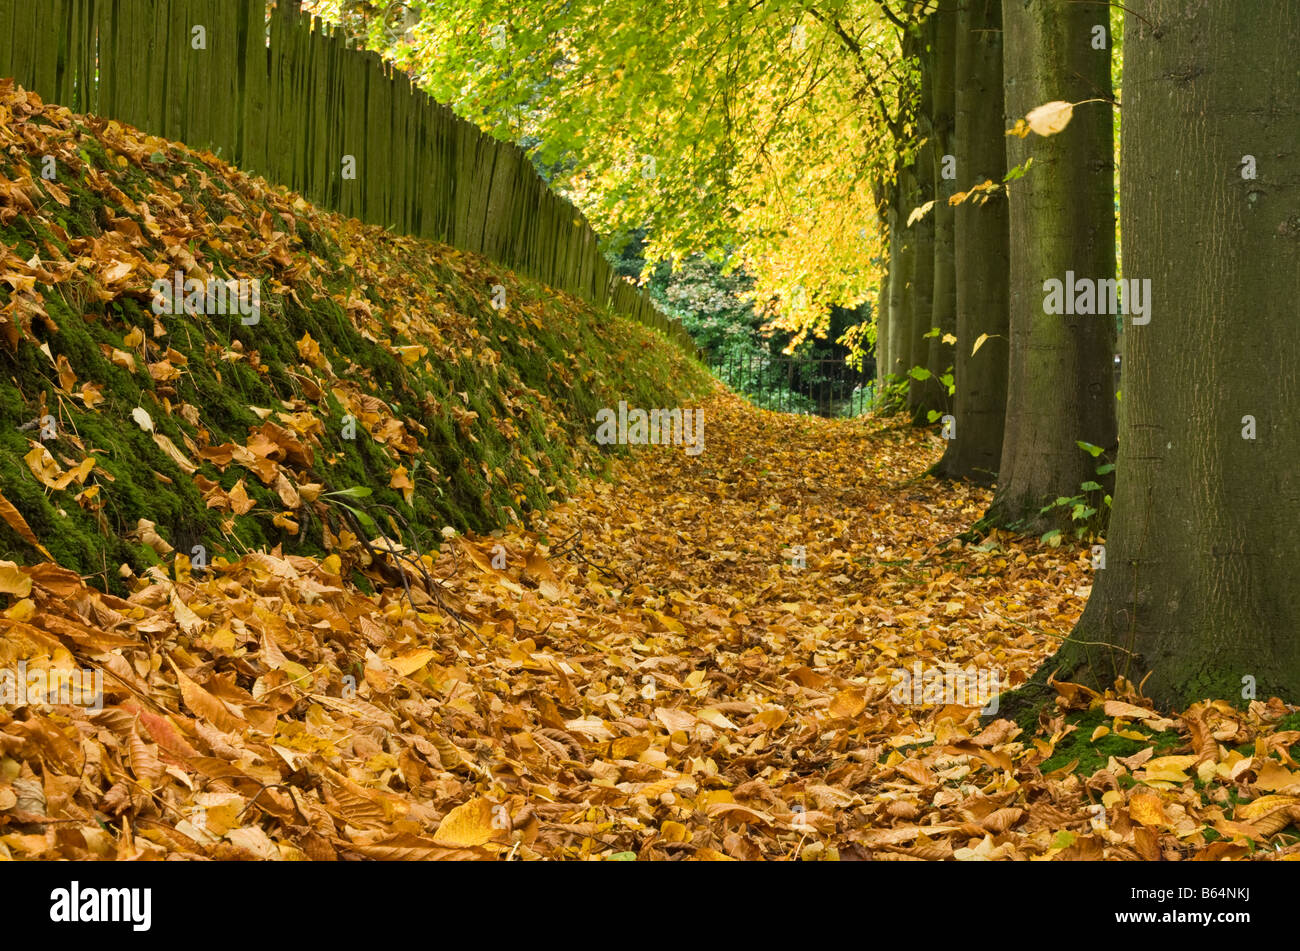 A Carpet of Autumn Leaves and Avenue of Tree Trunks, Gawsworth, Cheshire, England, UK Stock Photo